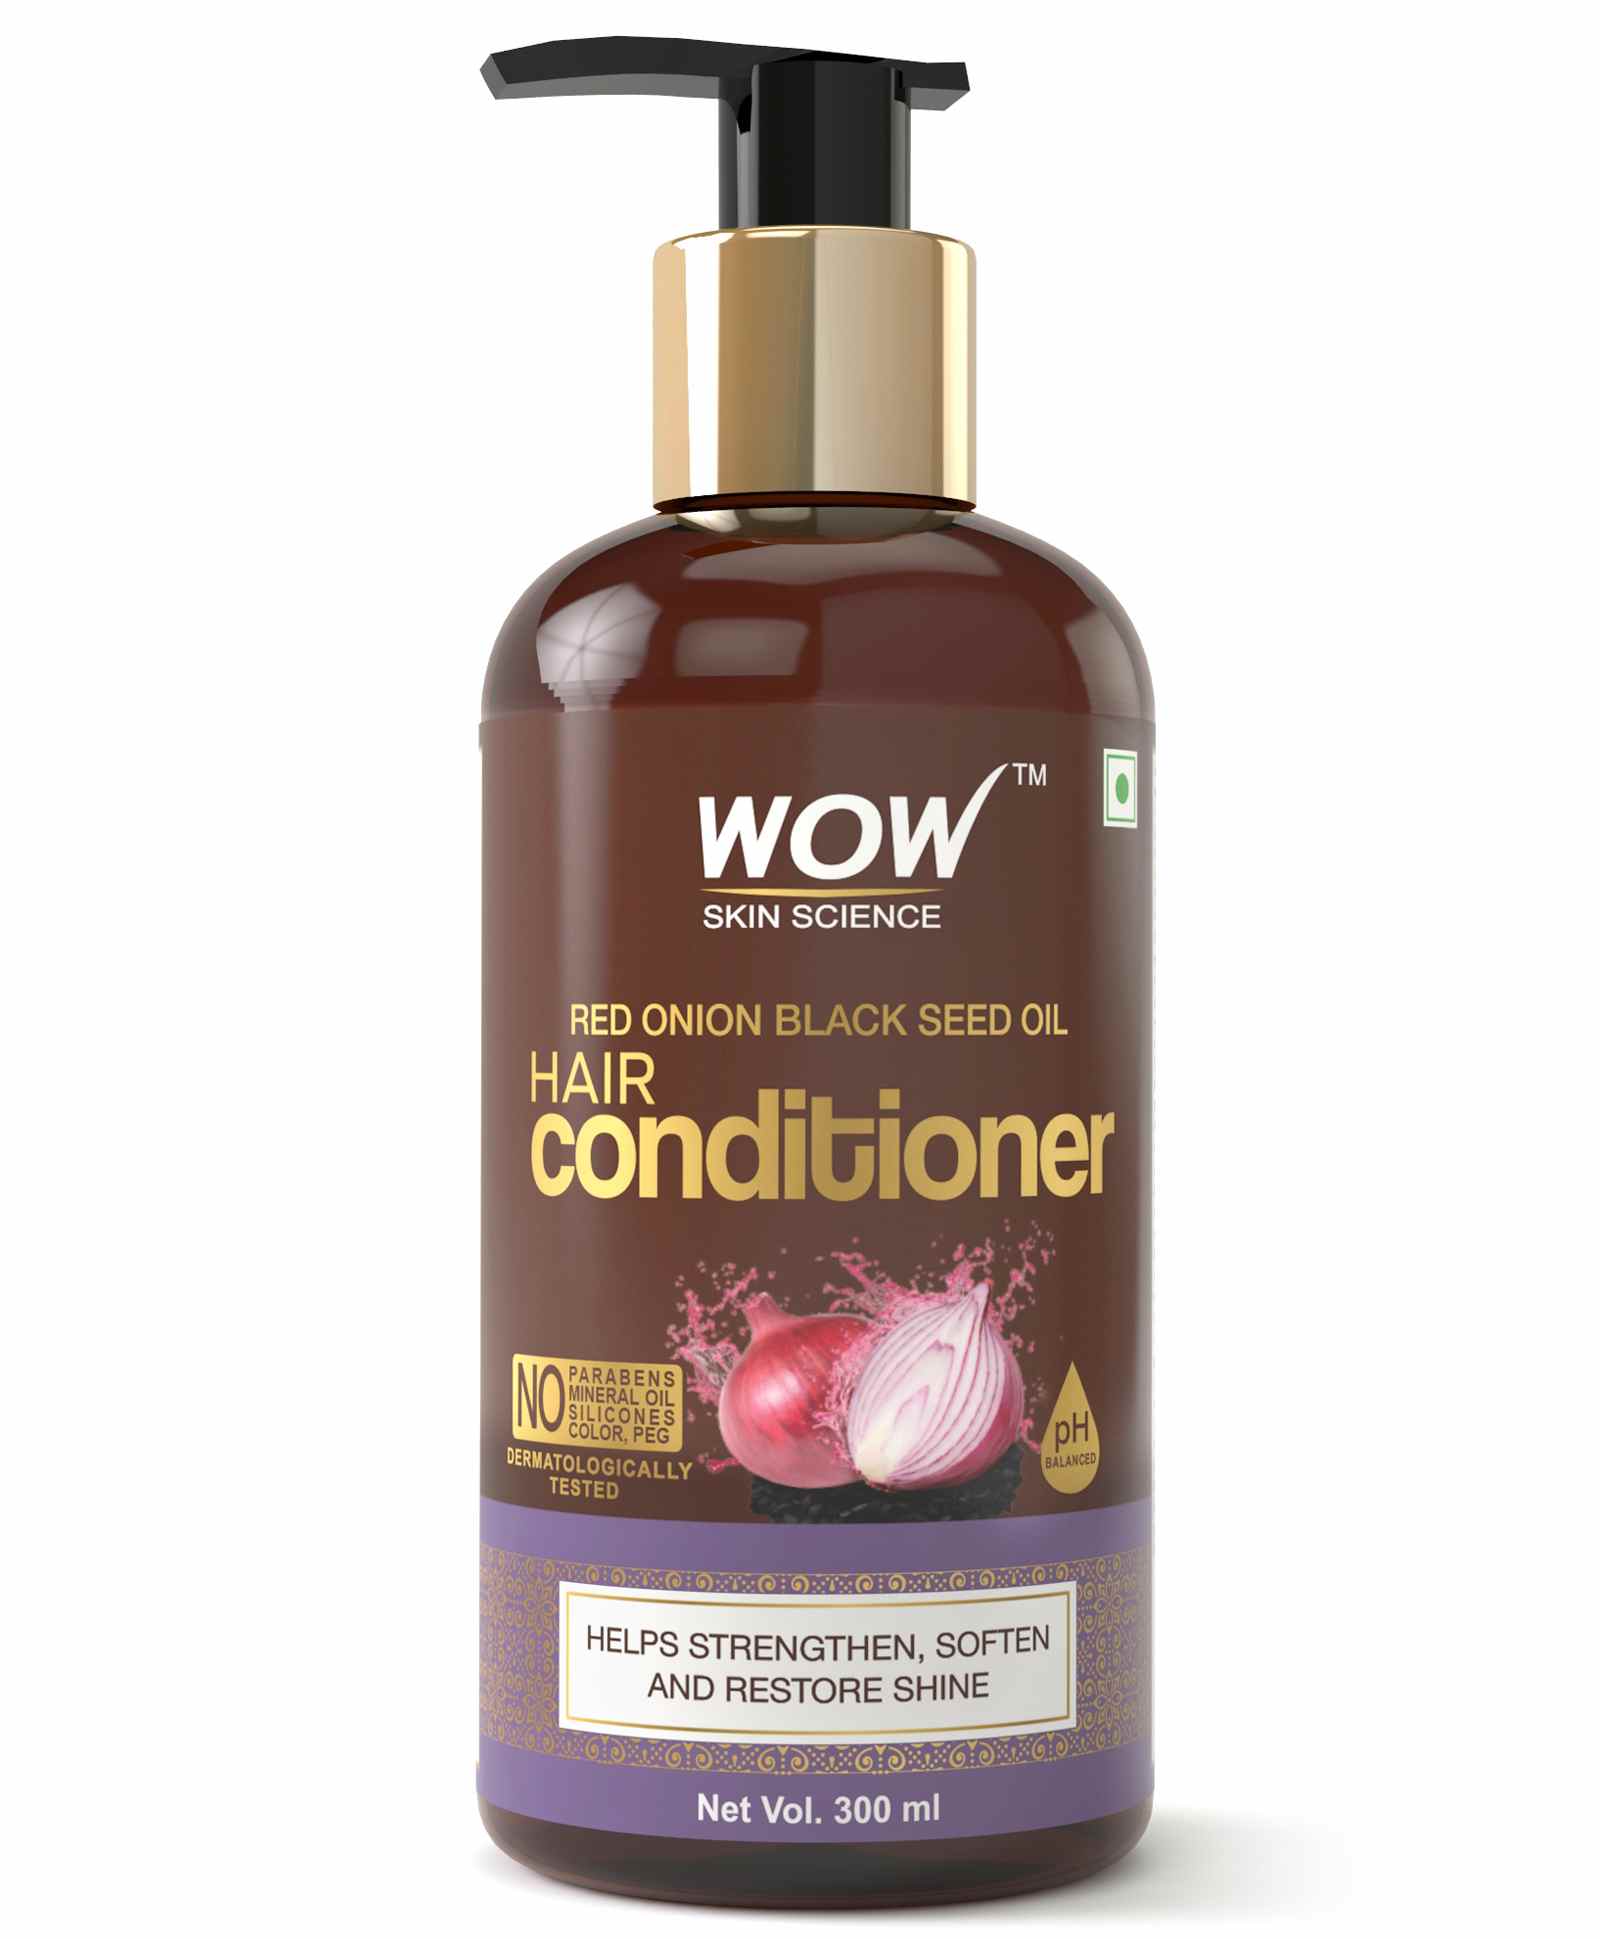 Wow Skin Science Red Onion Black Seed Oil Hair Conditioner - 300 ml Online  in India, Buy at Best Price from  - 8144412